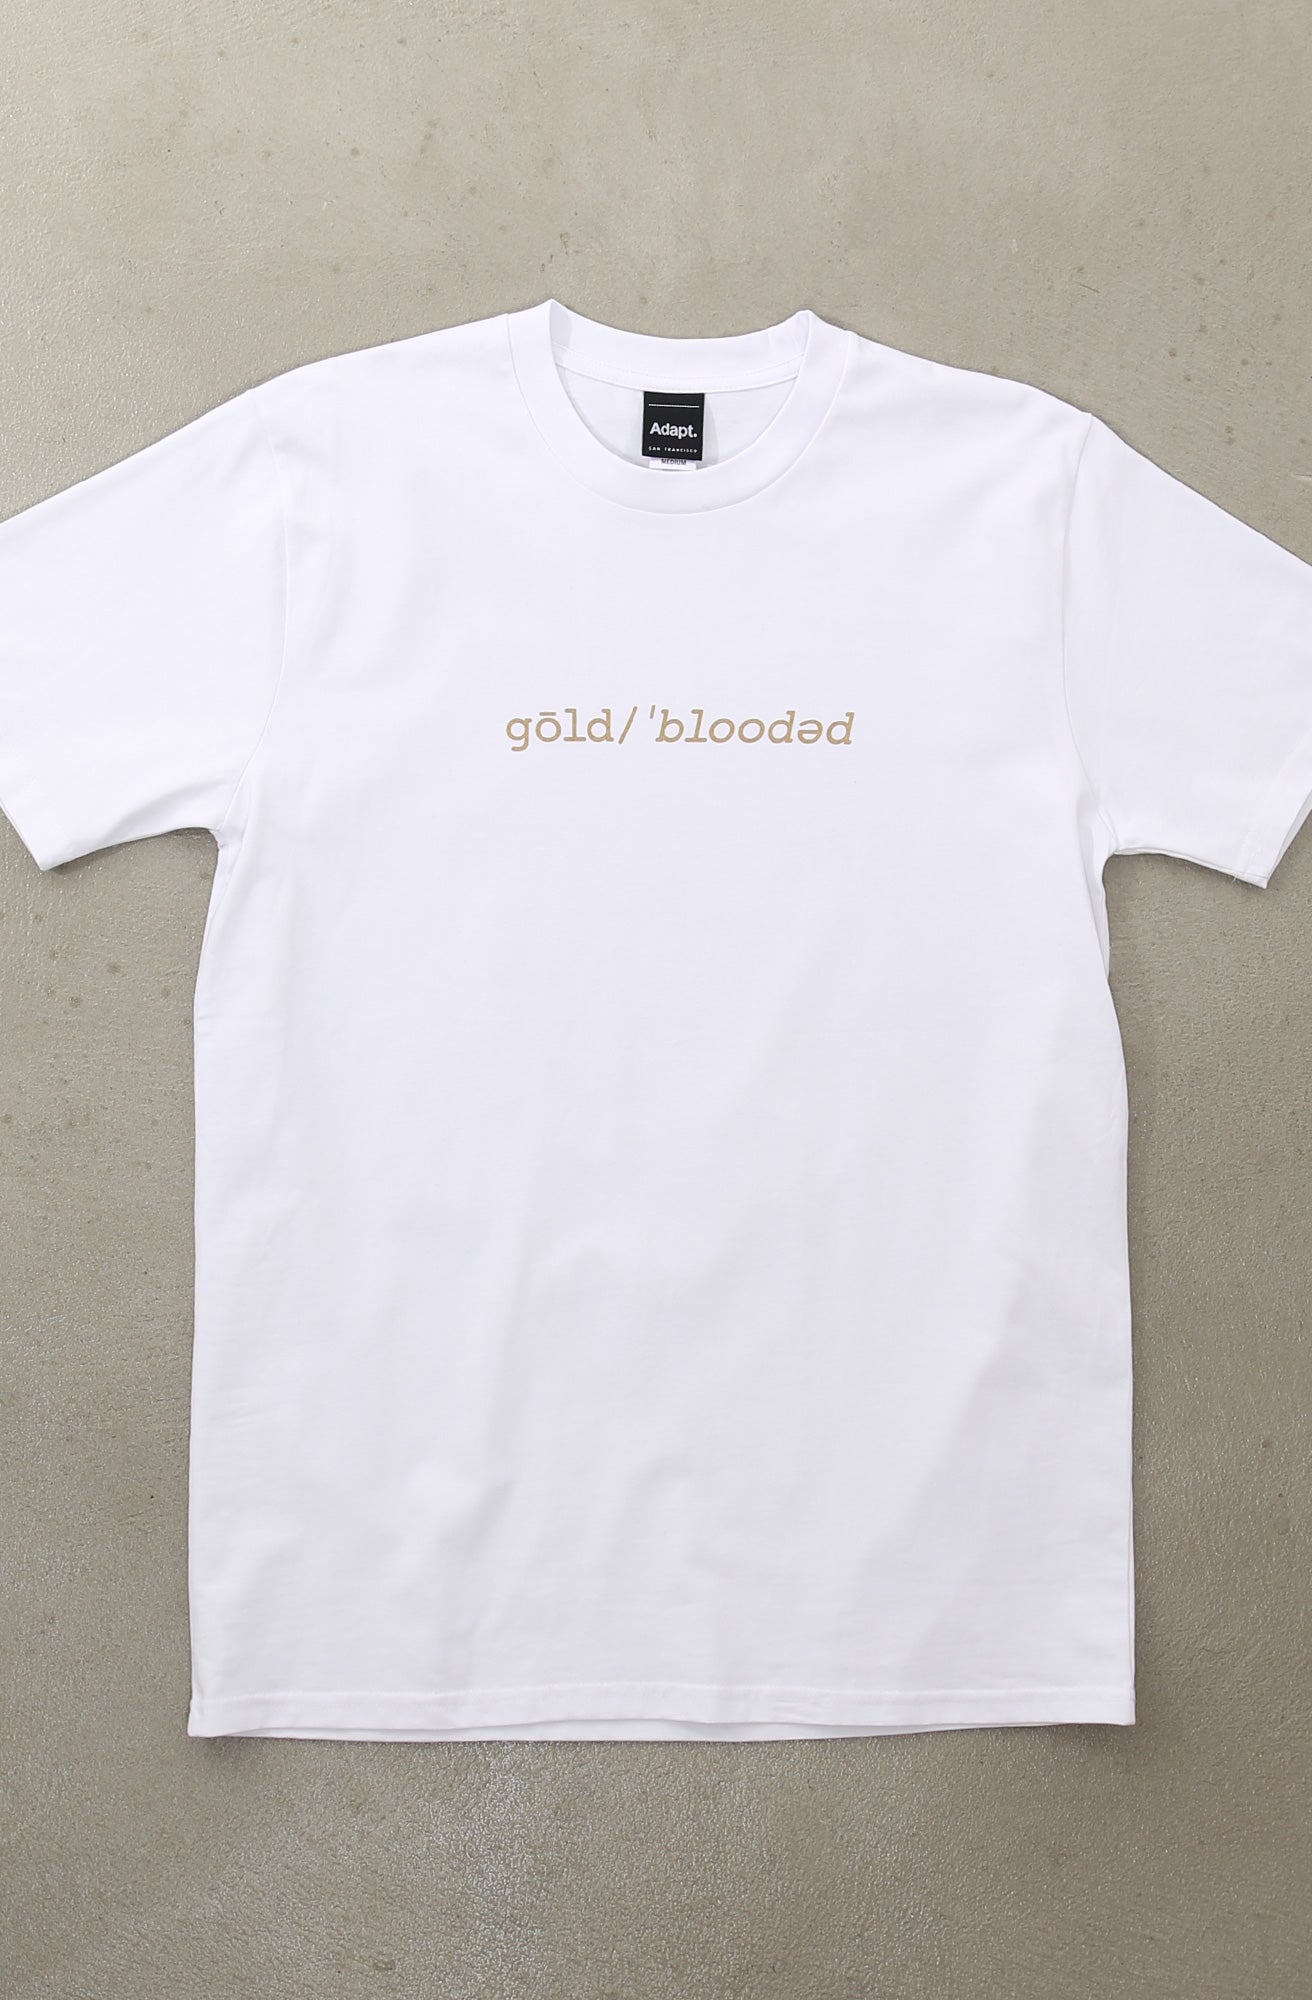 Gold Blooded Definition (Men's White Tee)